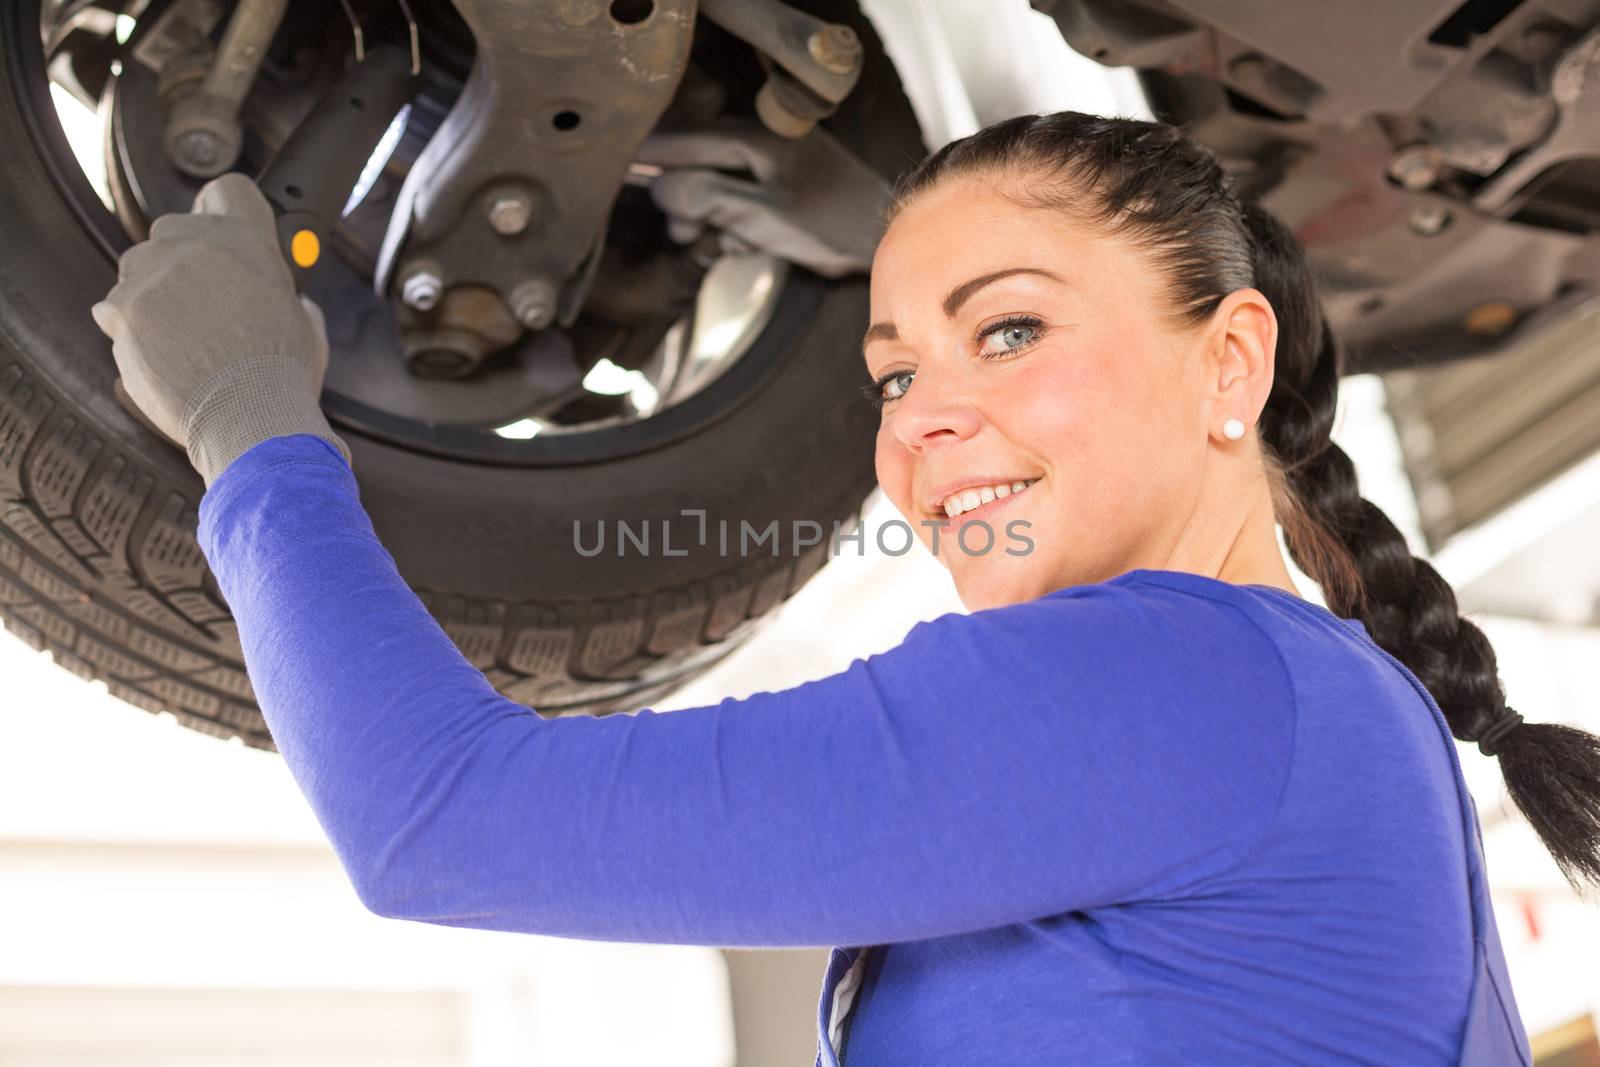 Woman repairing the brakes of a car on hydraulic lift